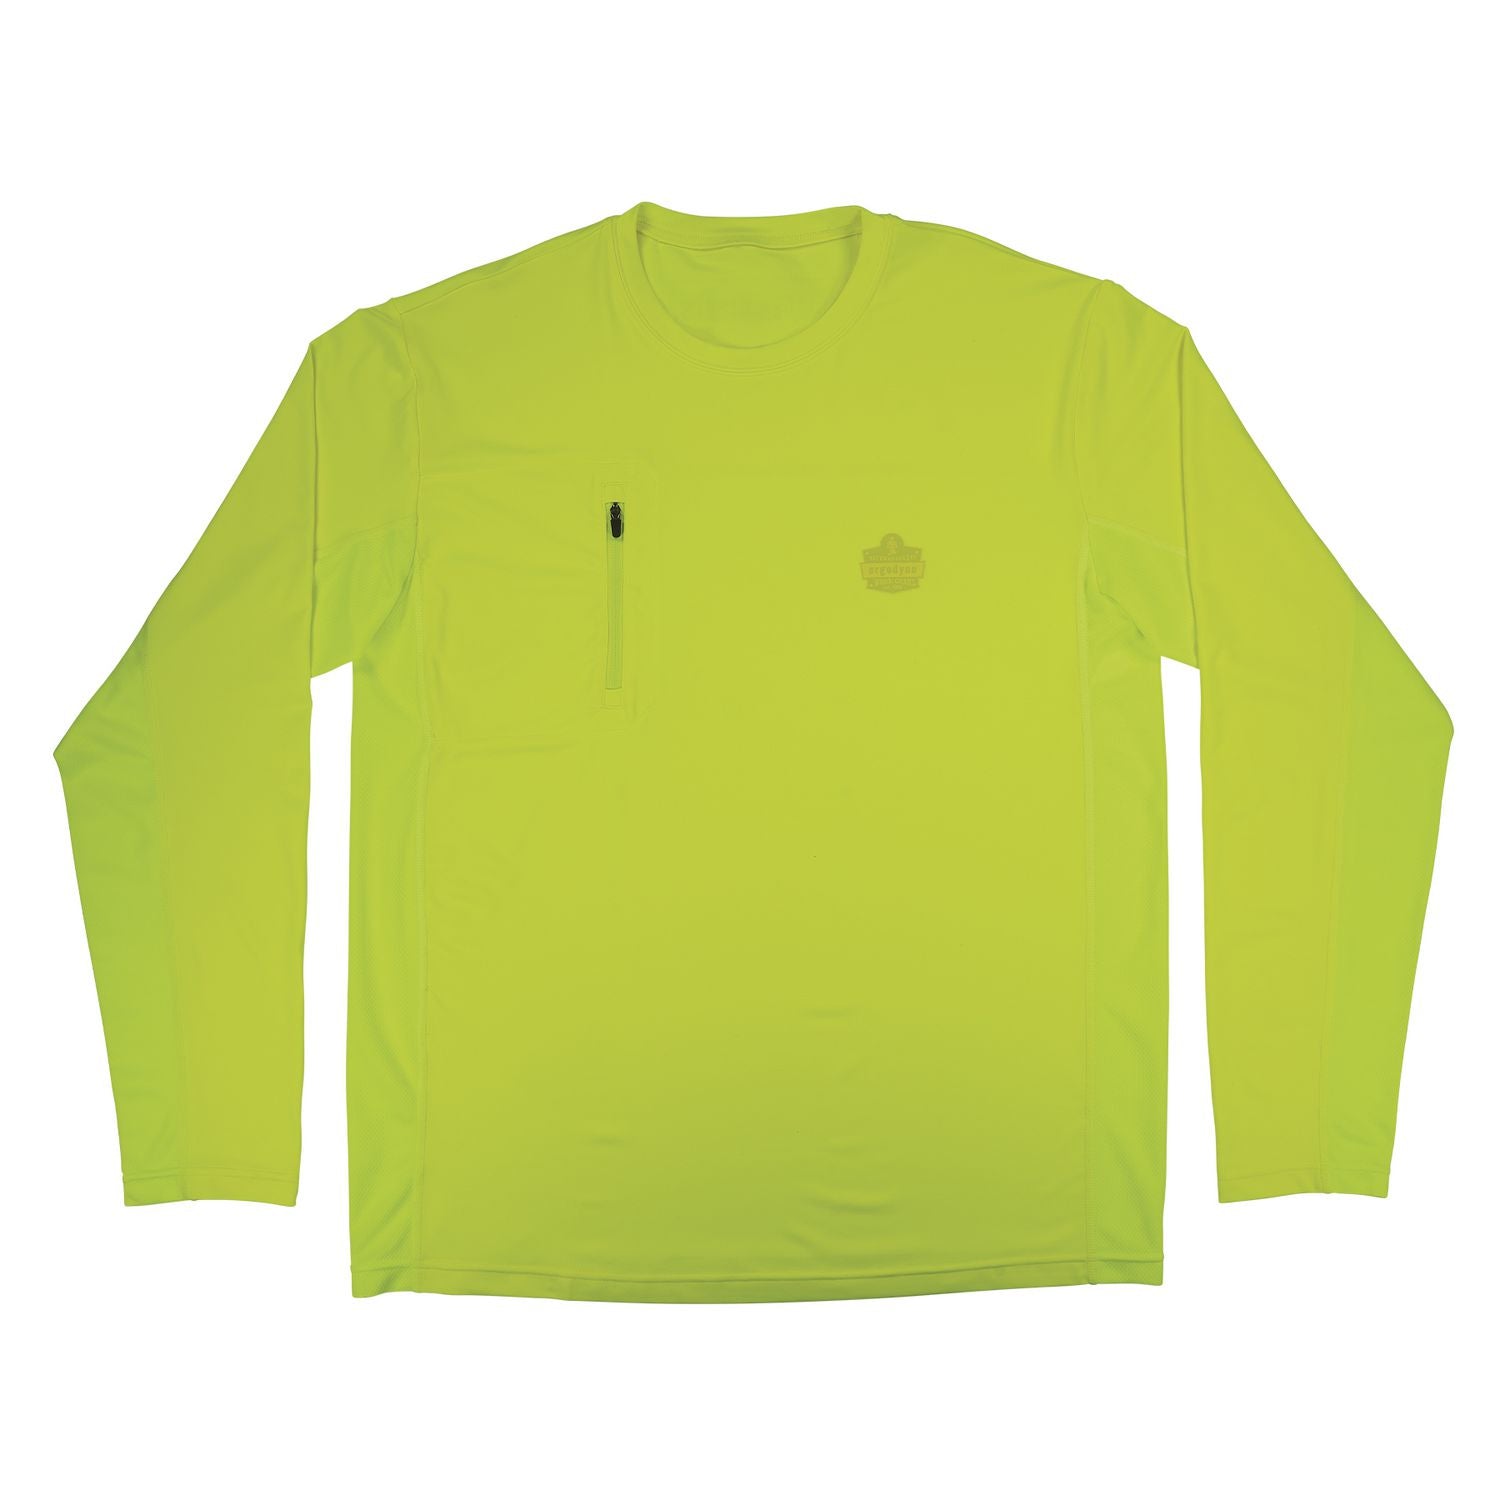 chill-its-6689-cooling-long-sleeve-sun-shirt-with-uv-protection-medium-lime-ships-in-1-3-business-days_ego12143 - 1